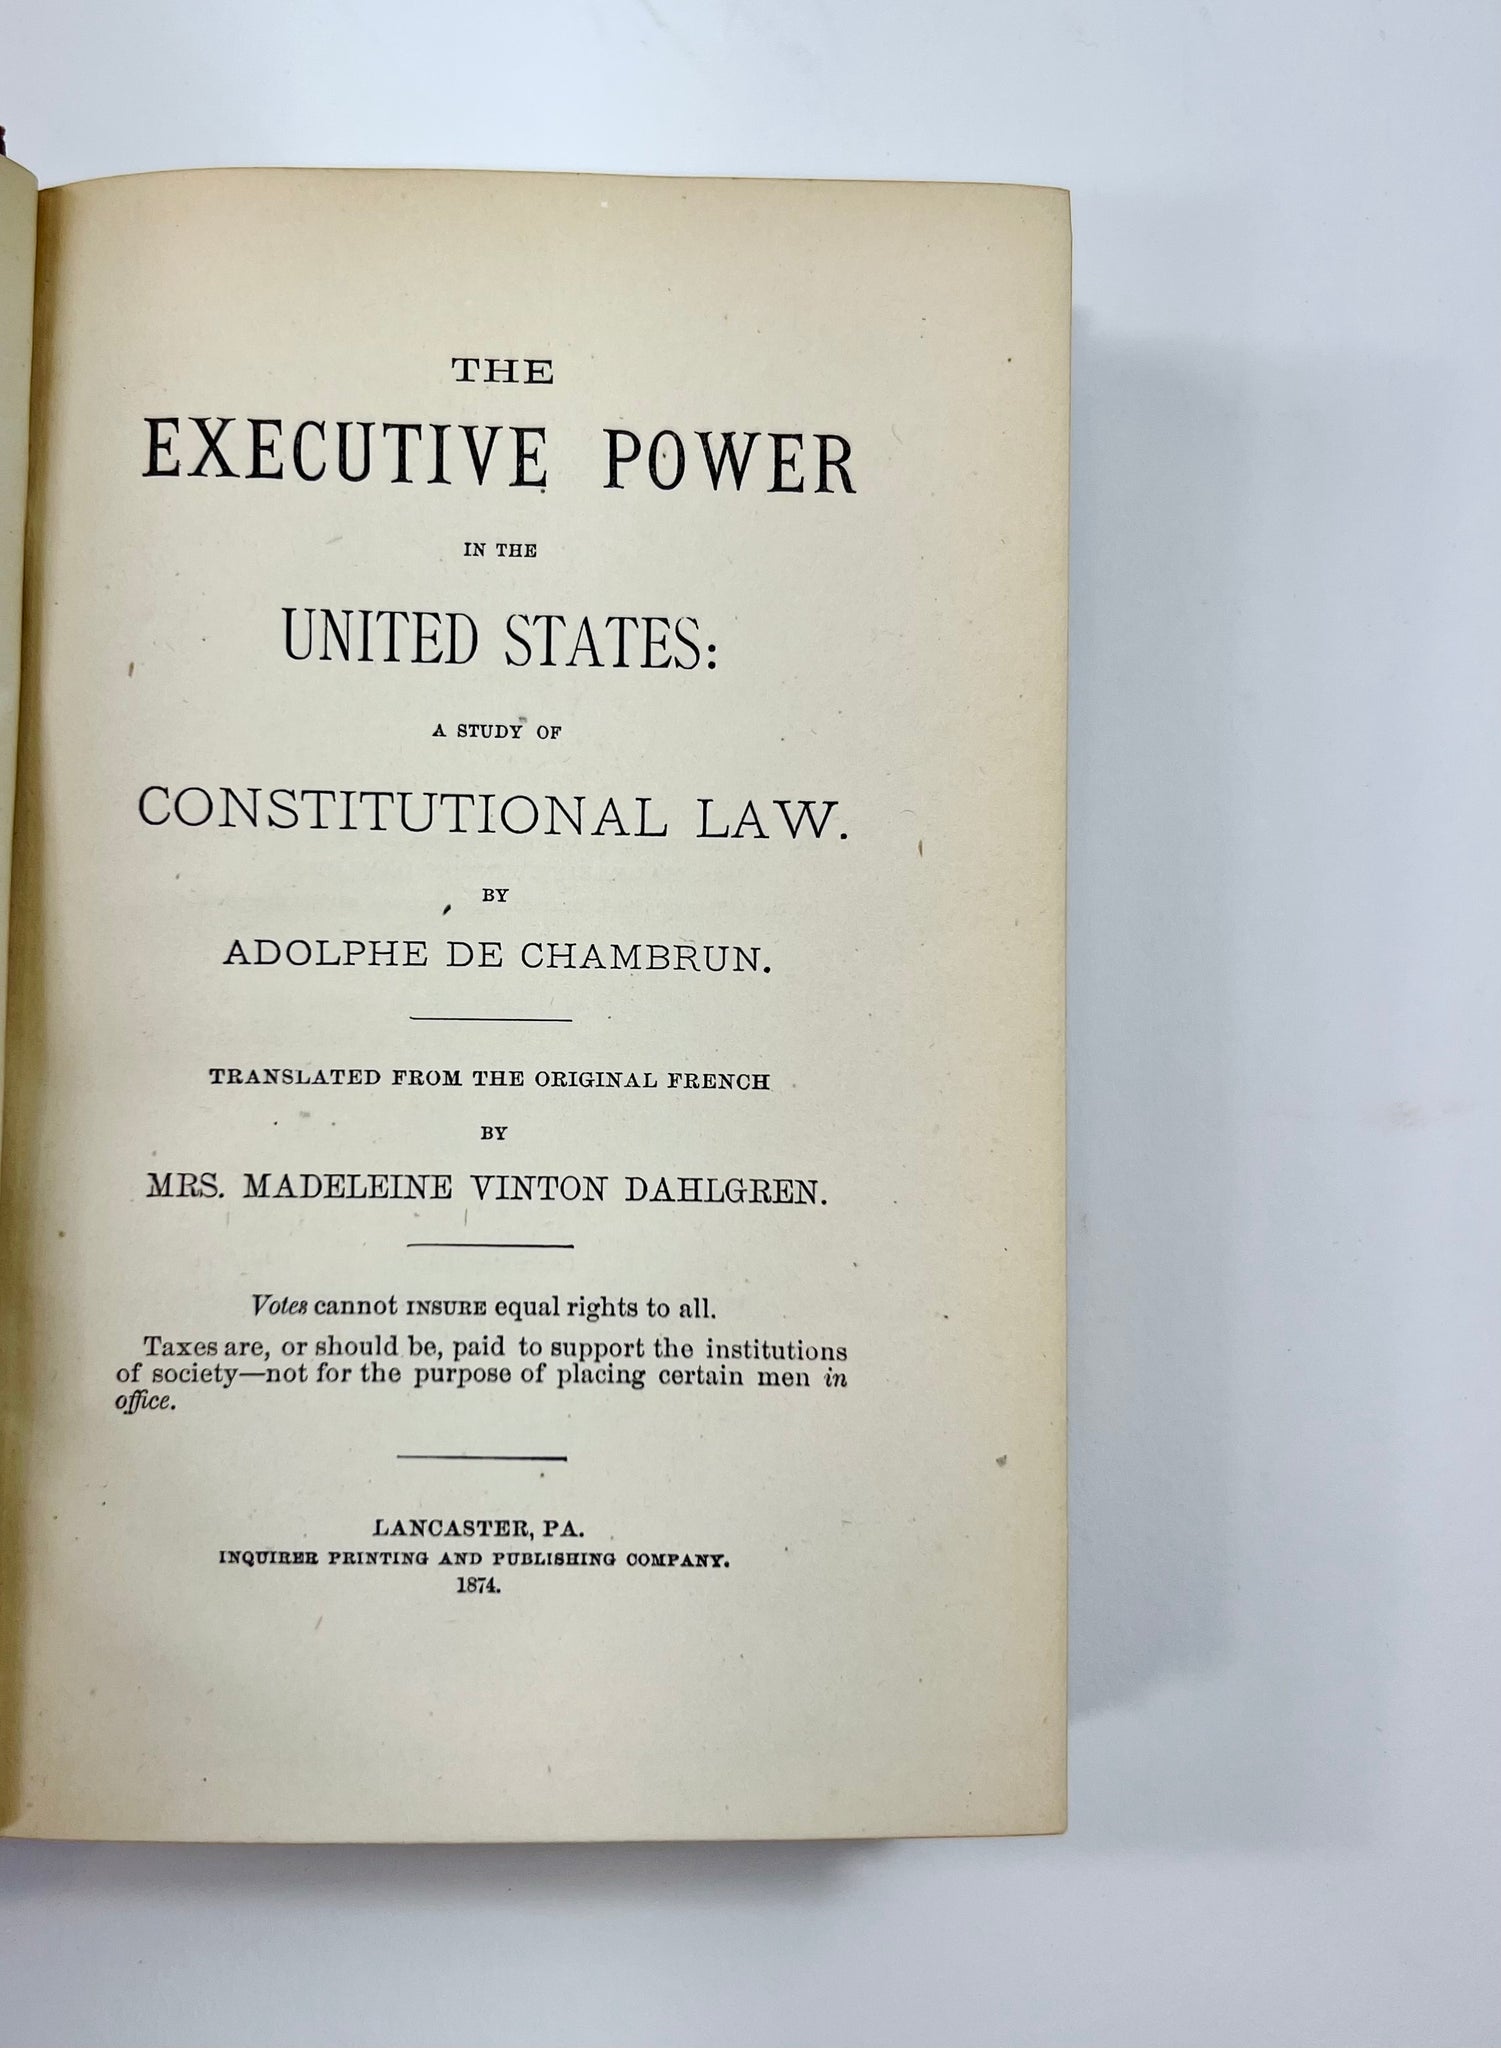 DE CHAMBRUN, Adolphe. The Executive Power in the United States.